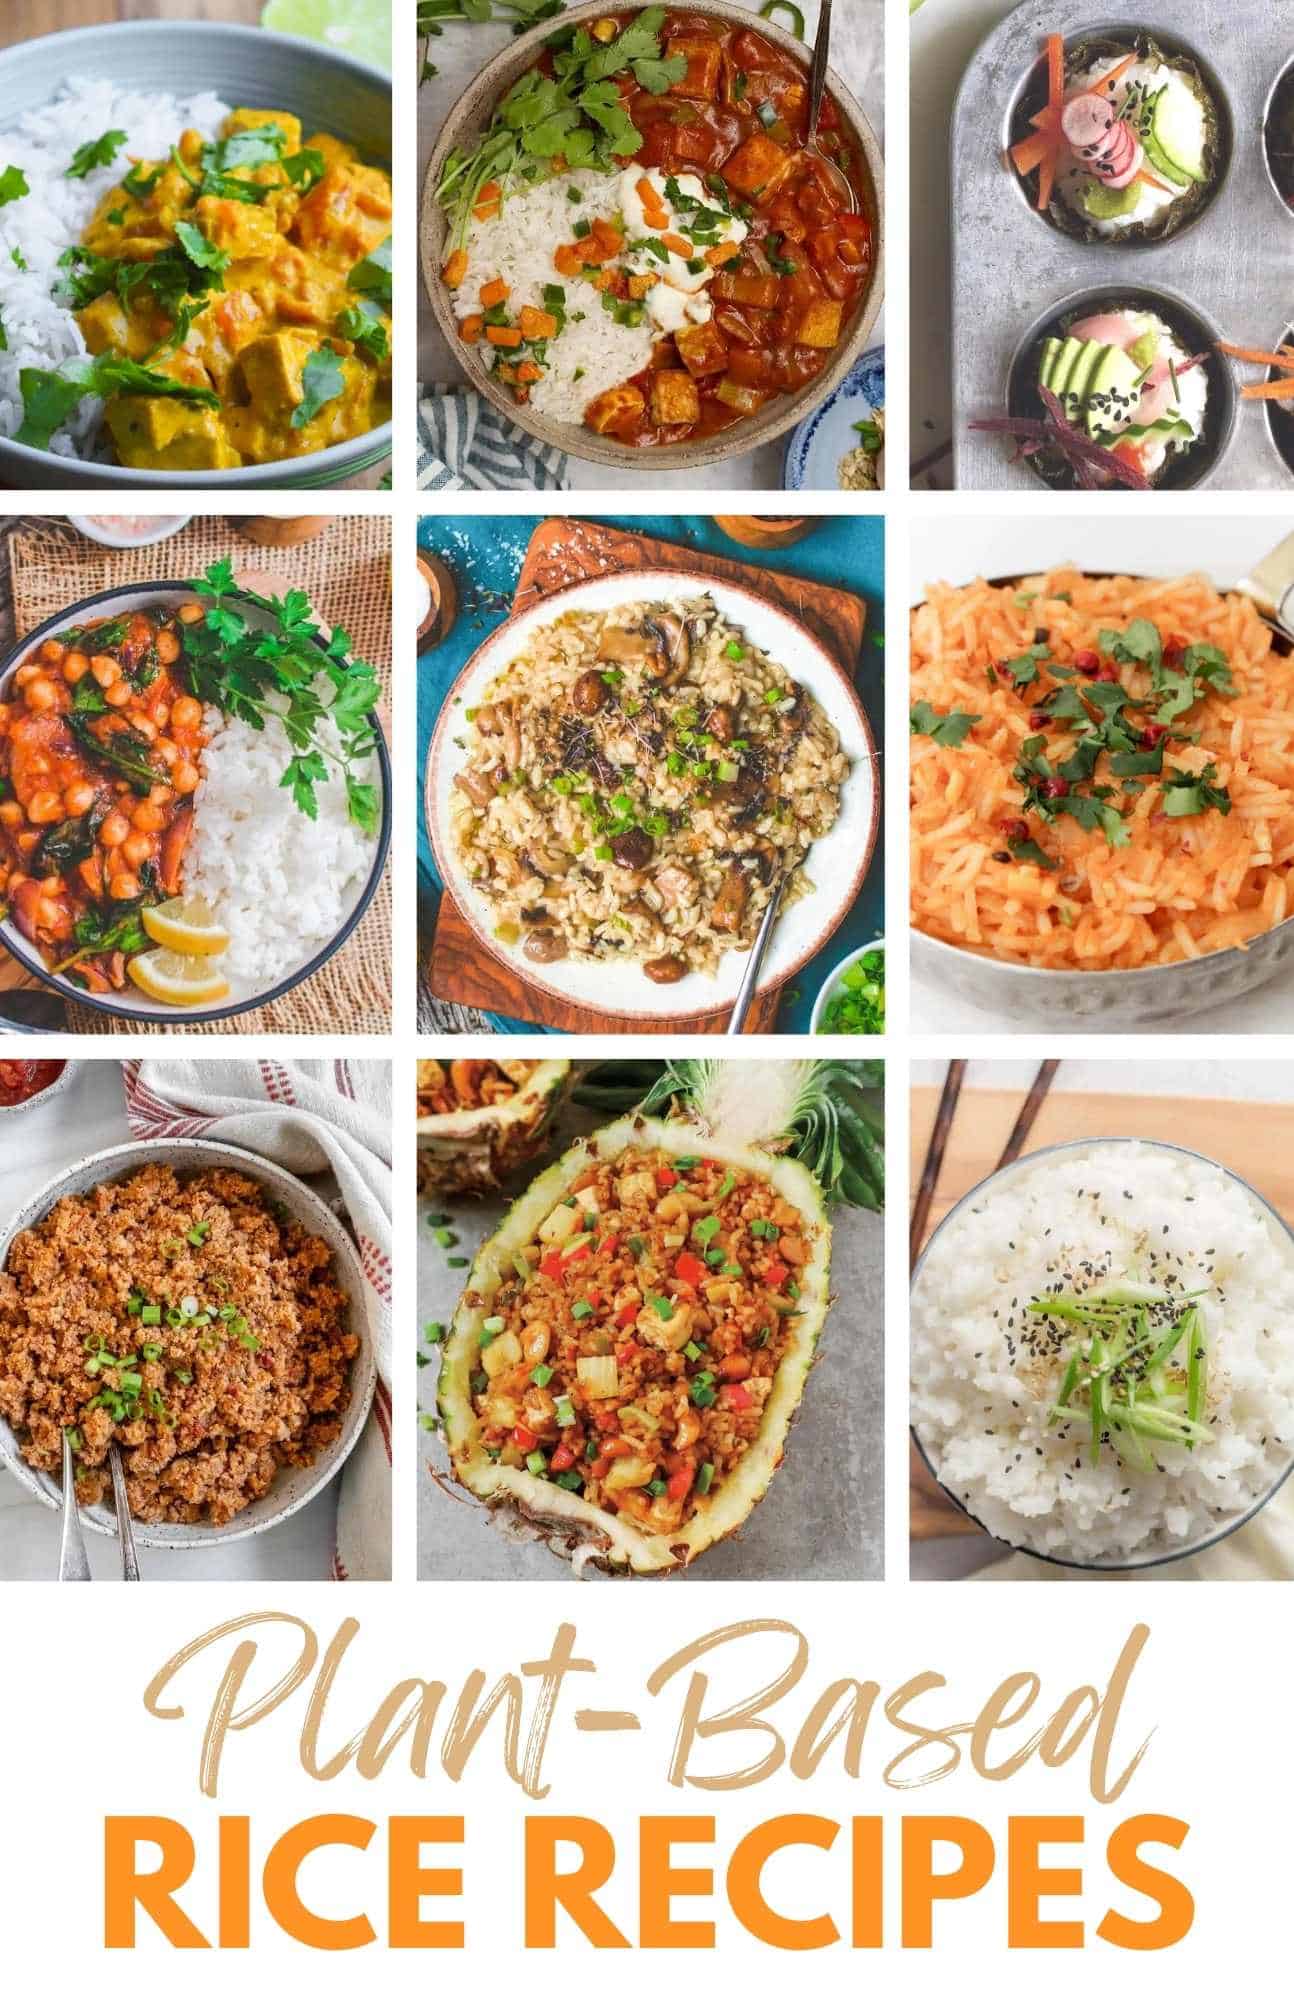 Best Plant Based and Vegan Rice Recipes